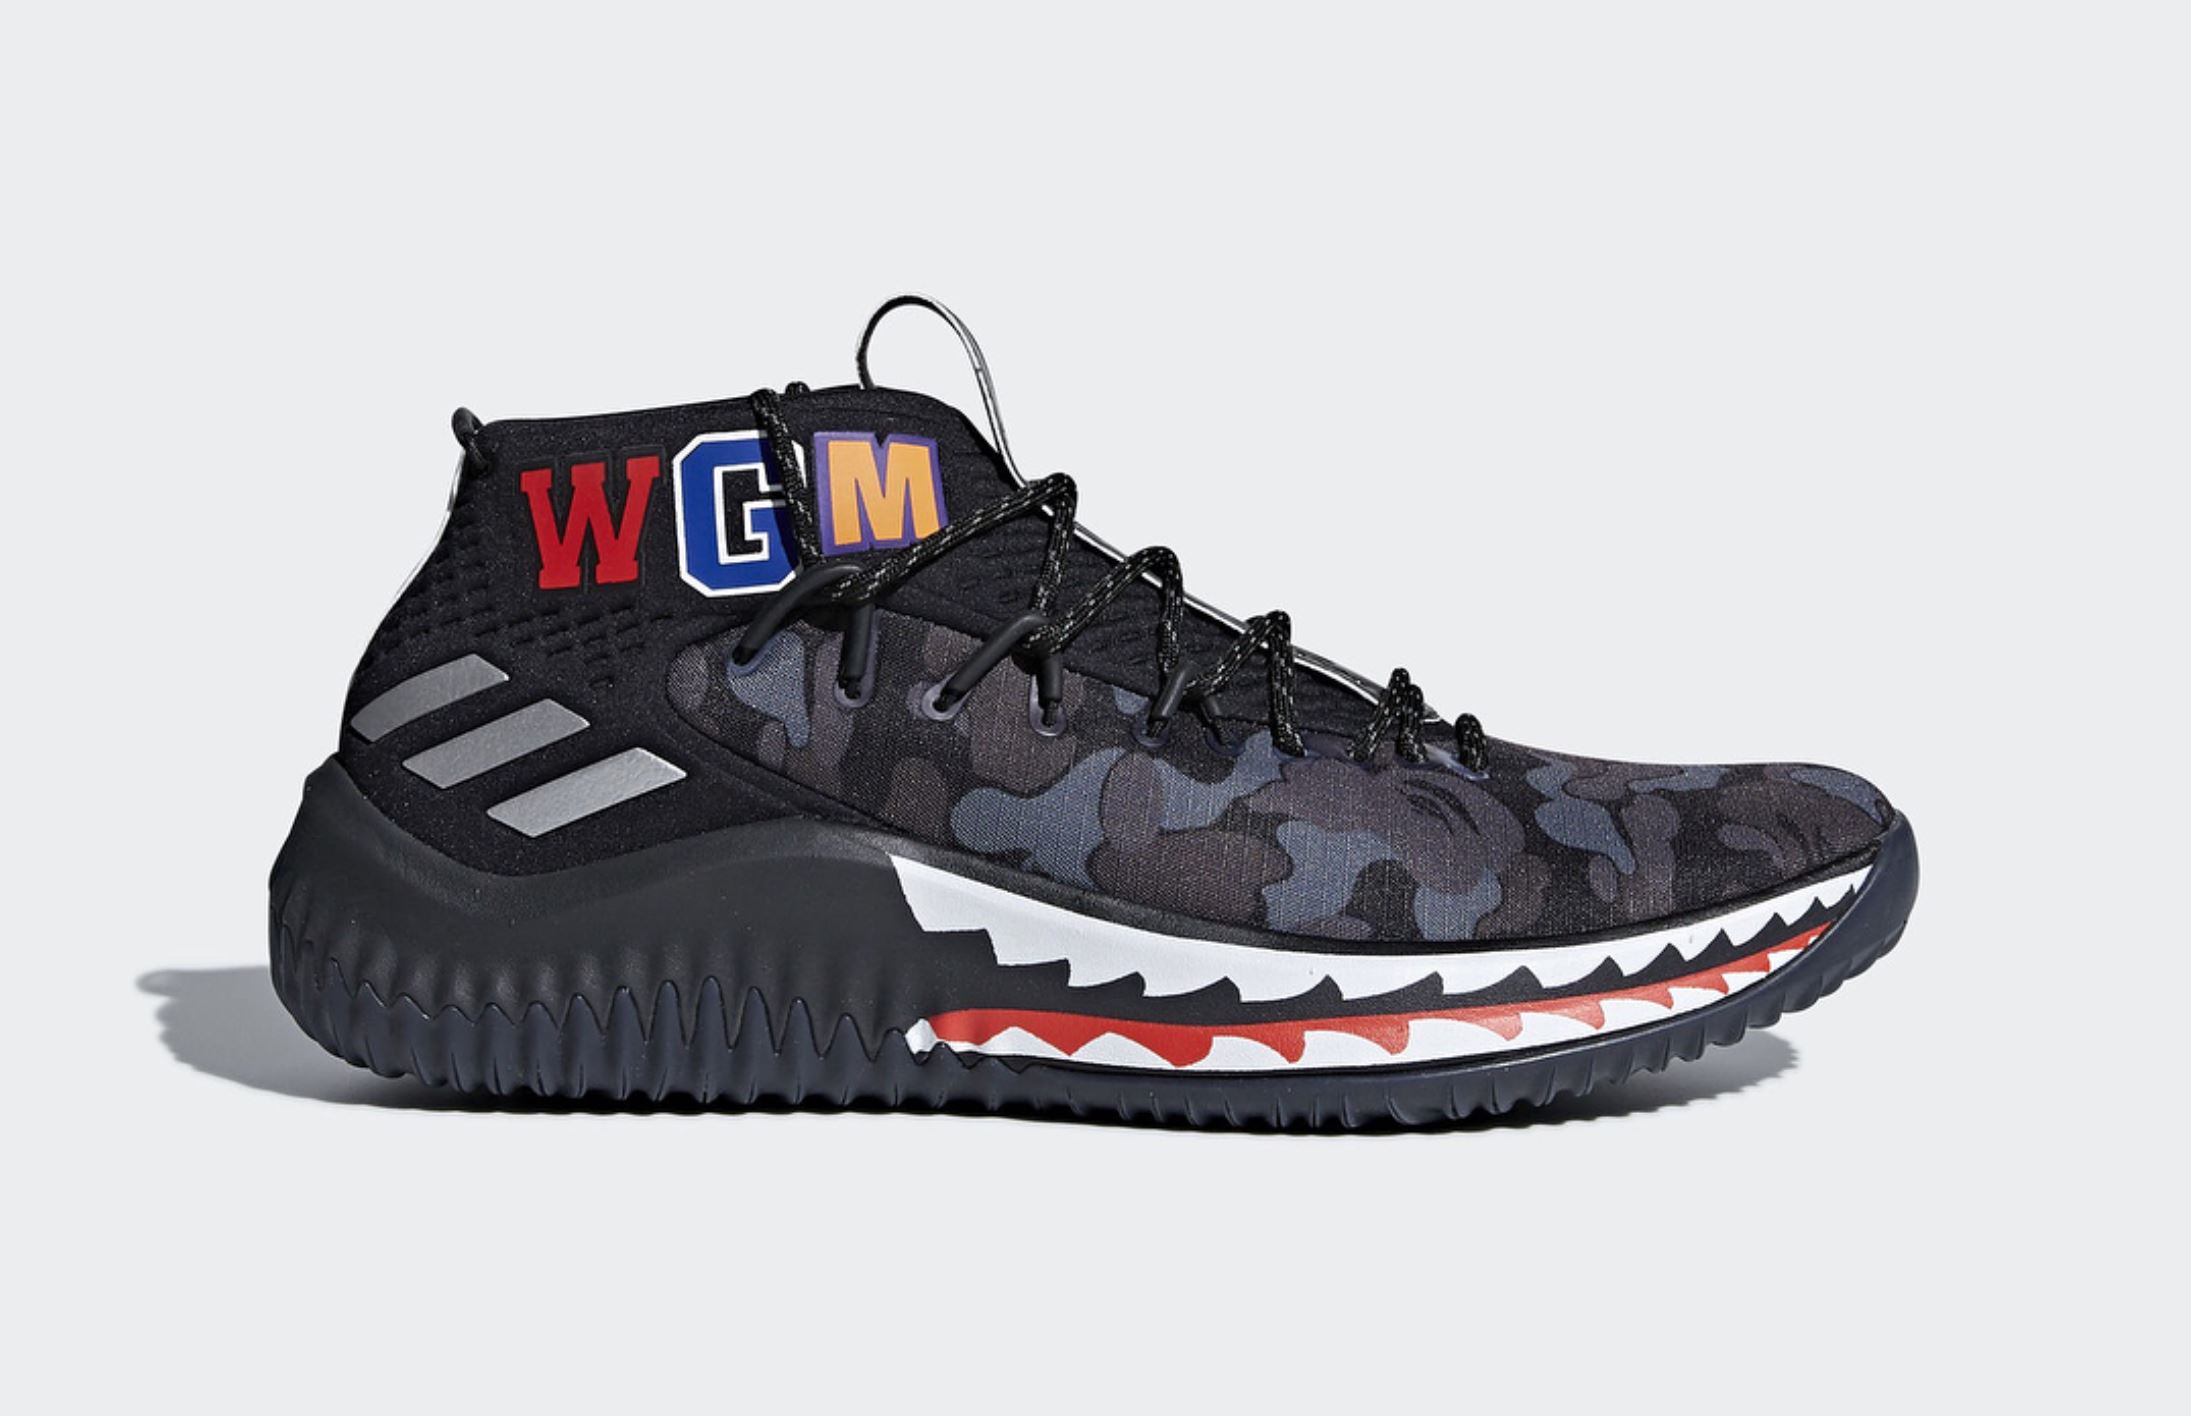 The adidas Dame 4 BAPE Releases Have an 